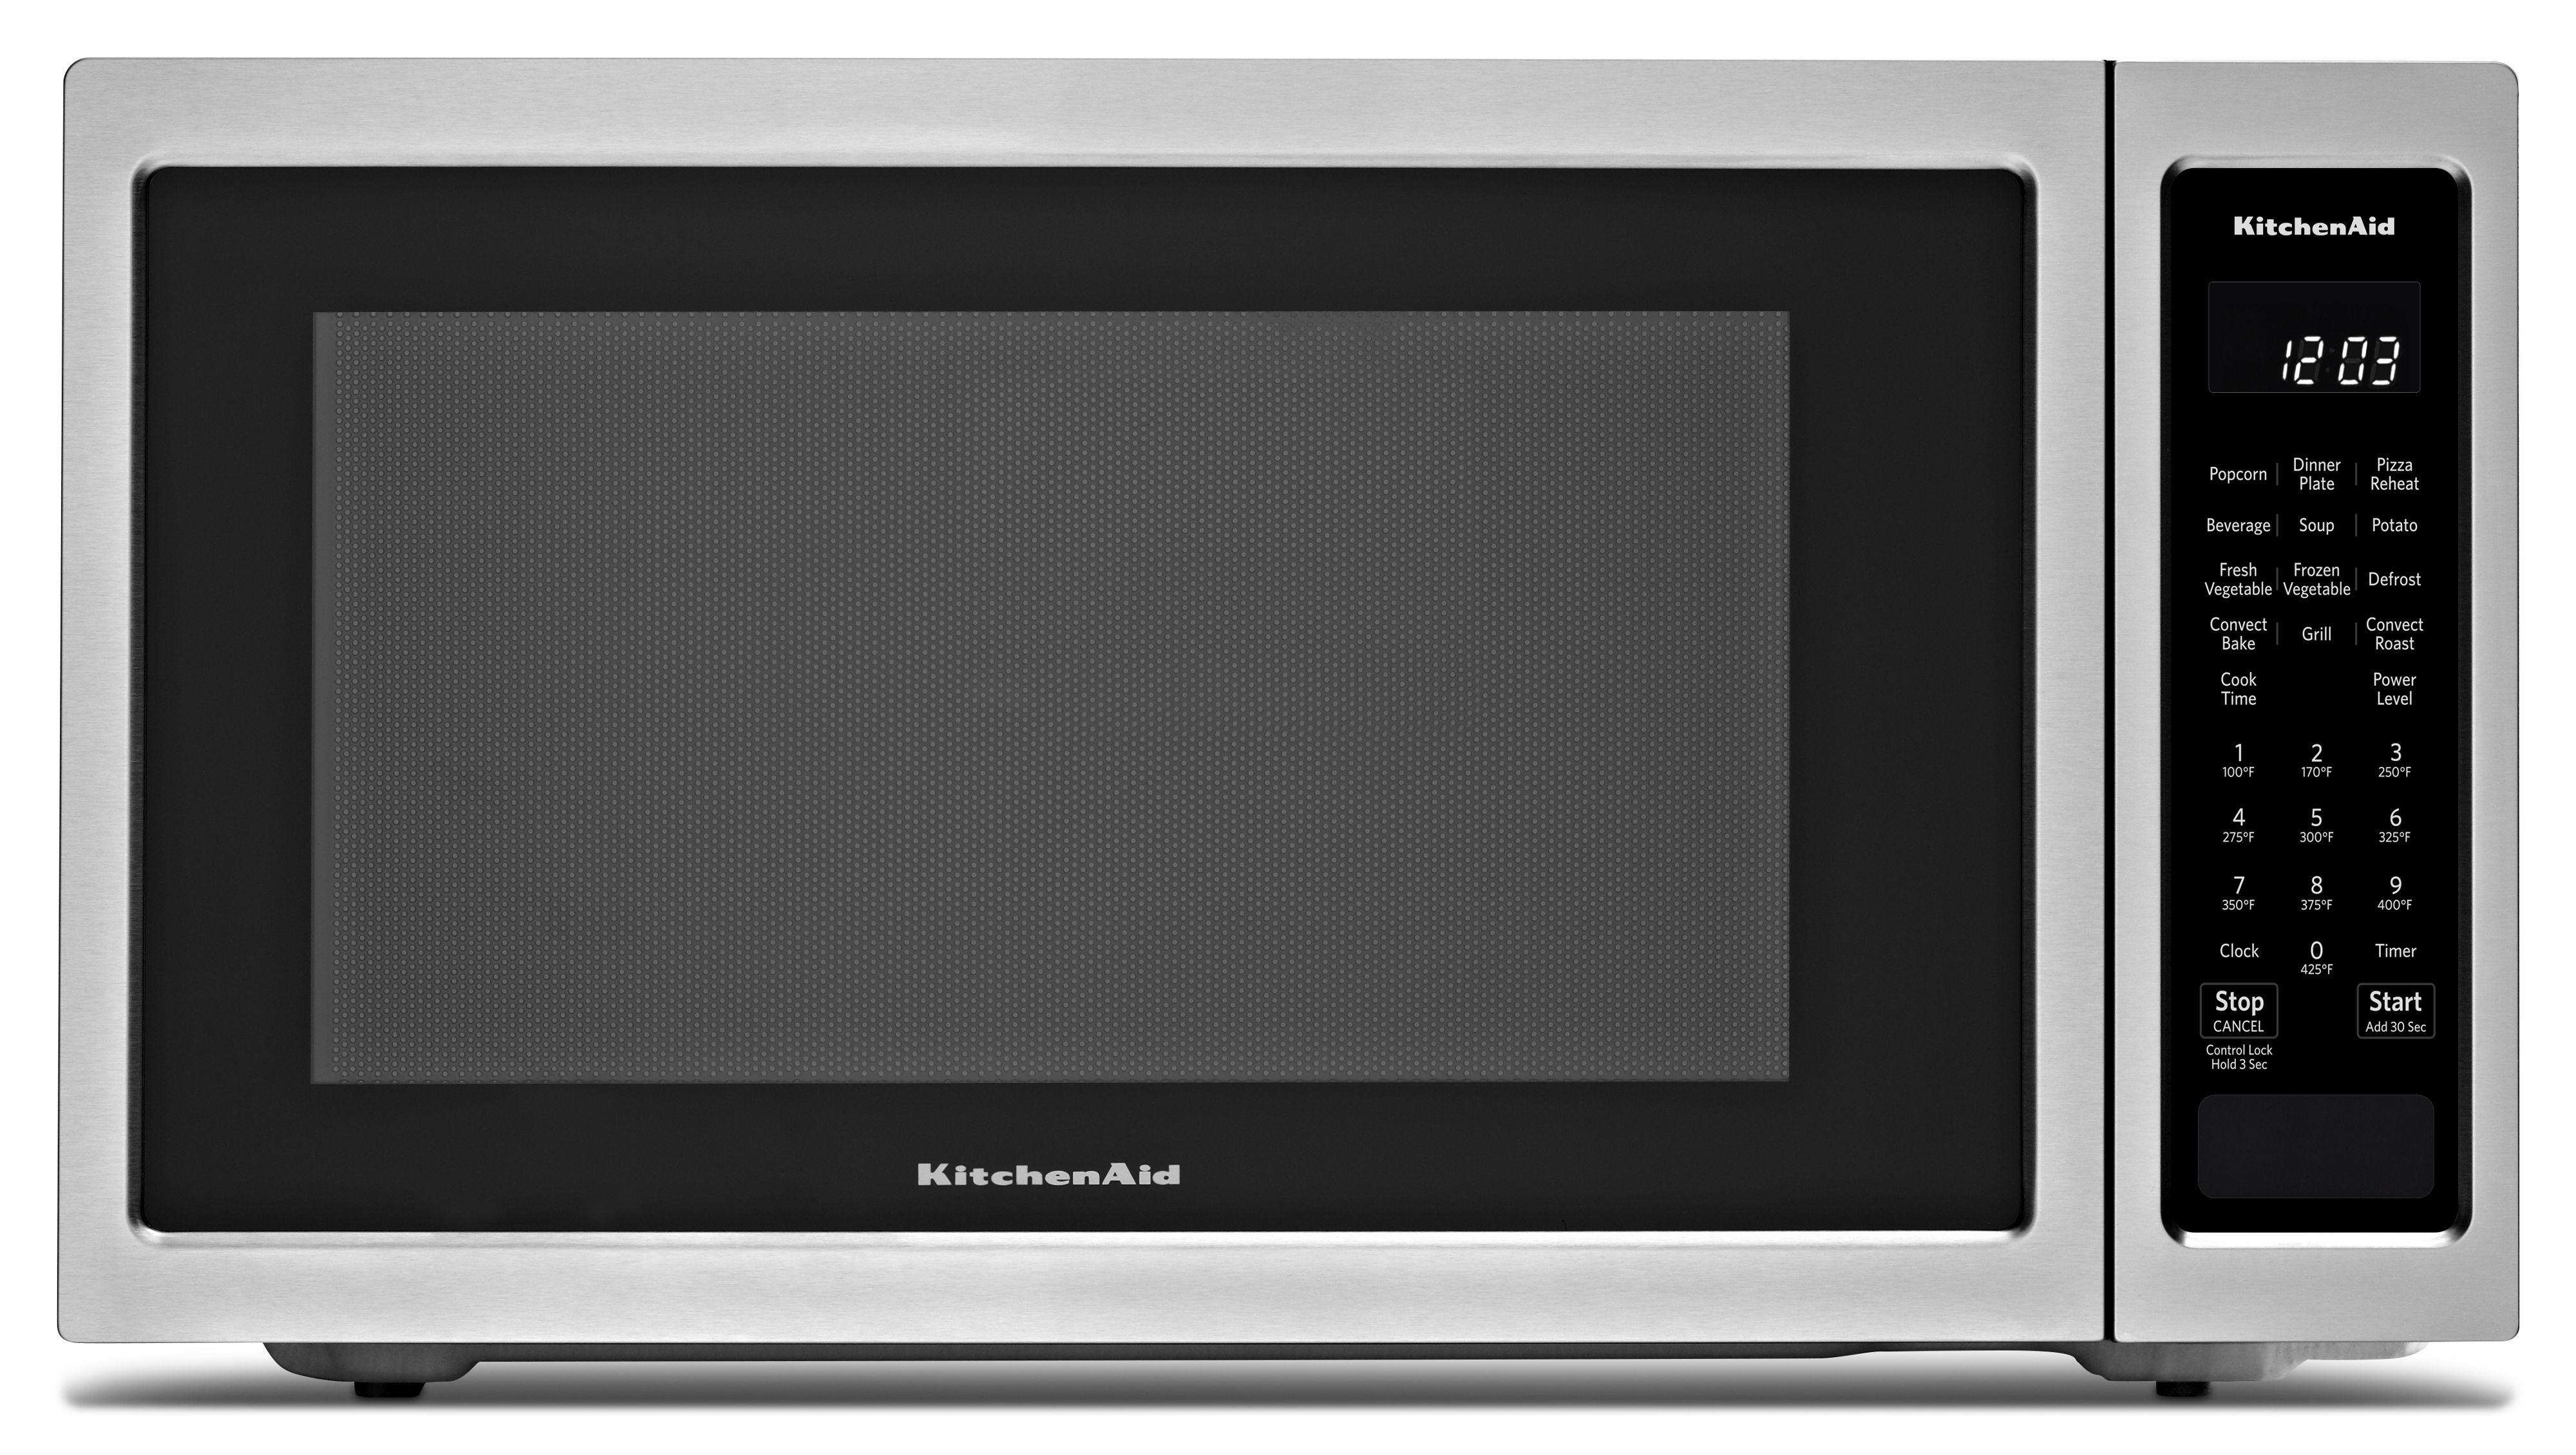 Kitchenaid KMCC5015GSS 22 Inch Countertop Microwave with Sensor Cooking